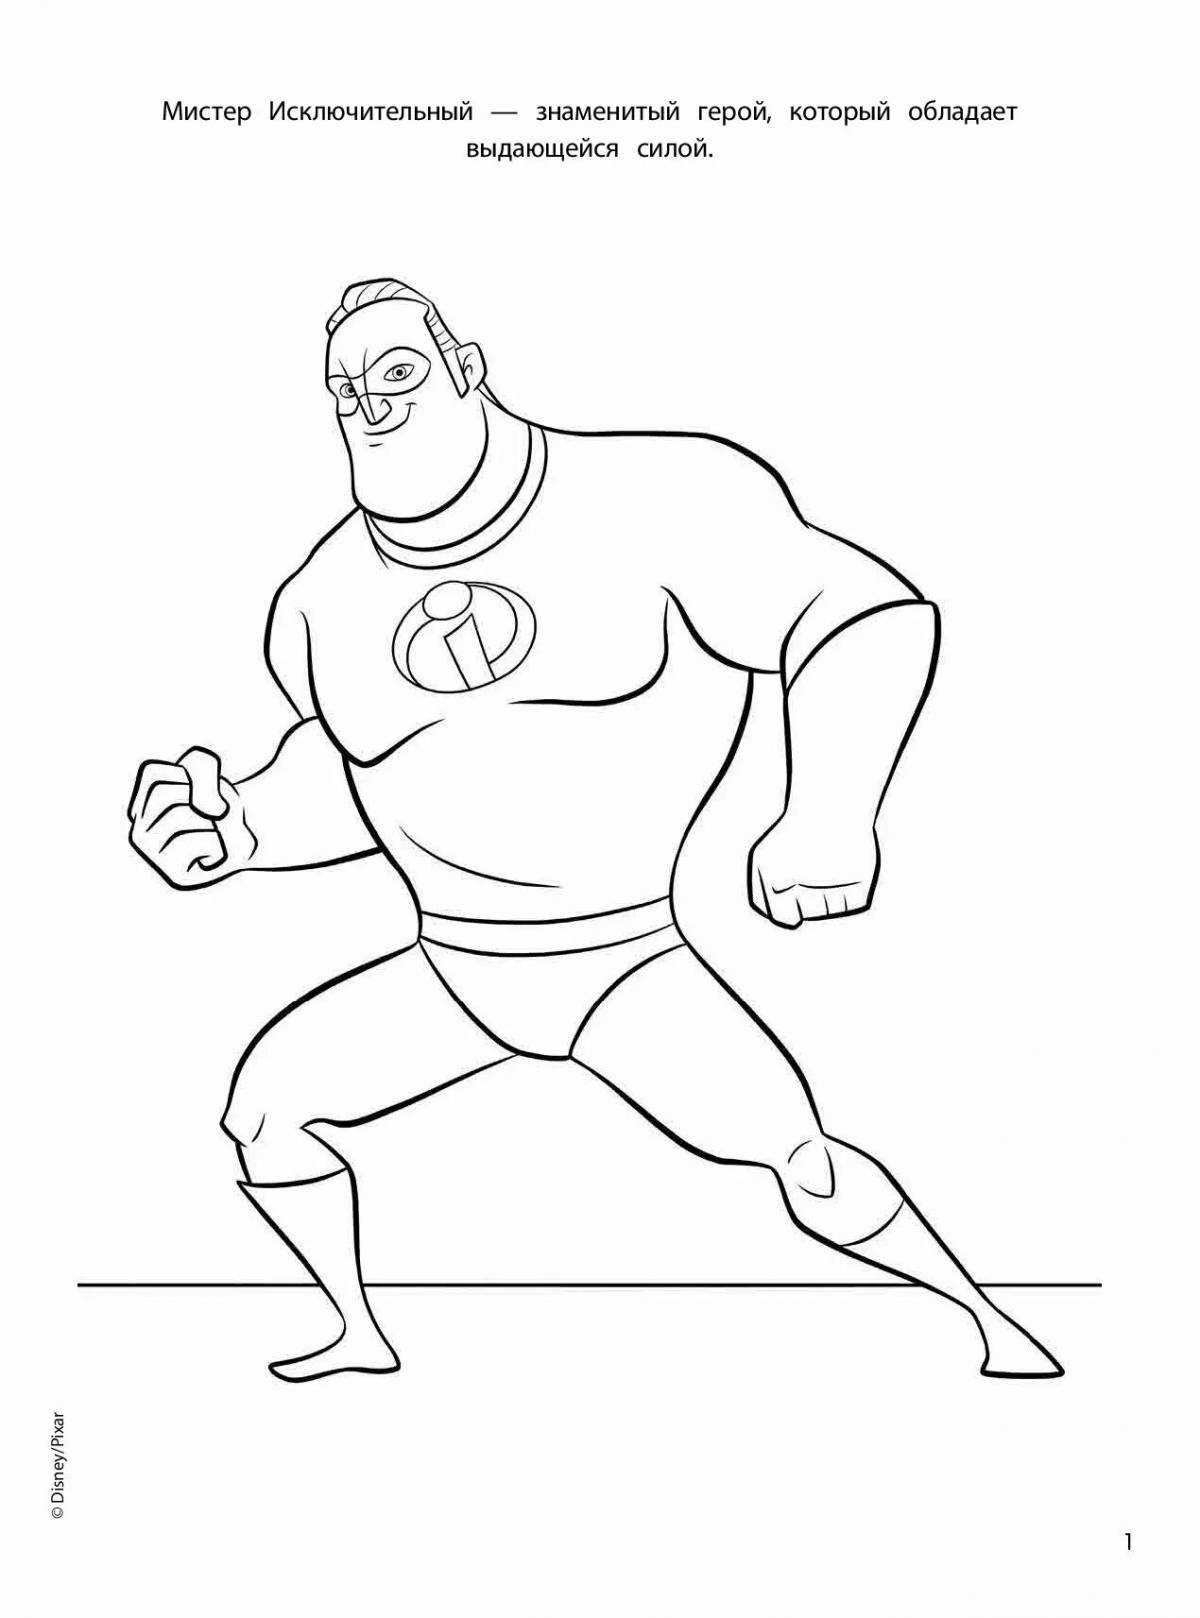 Mr Incredible animated coloring page